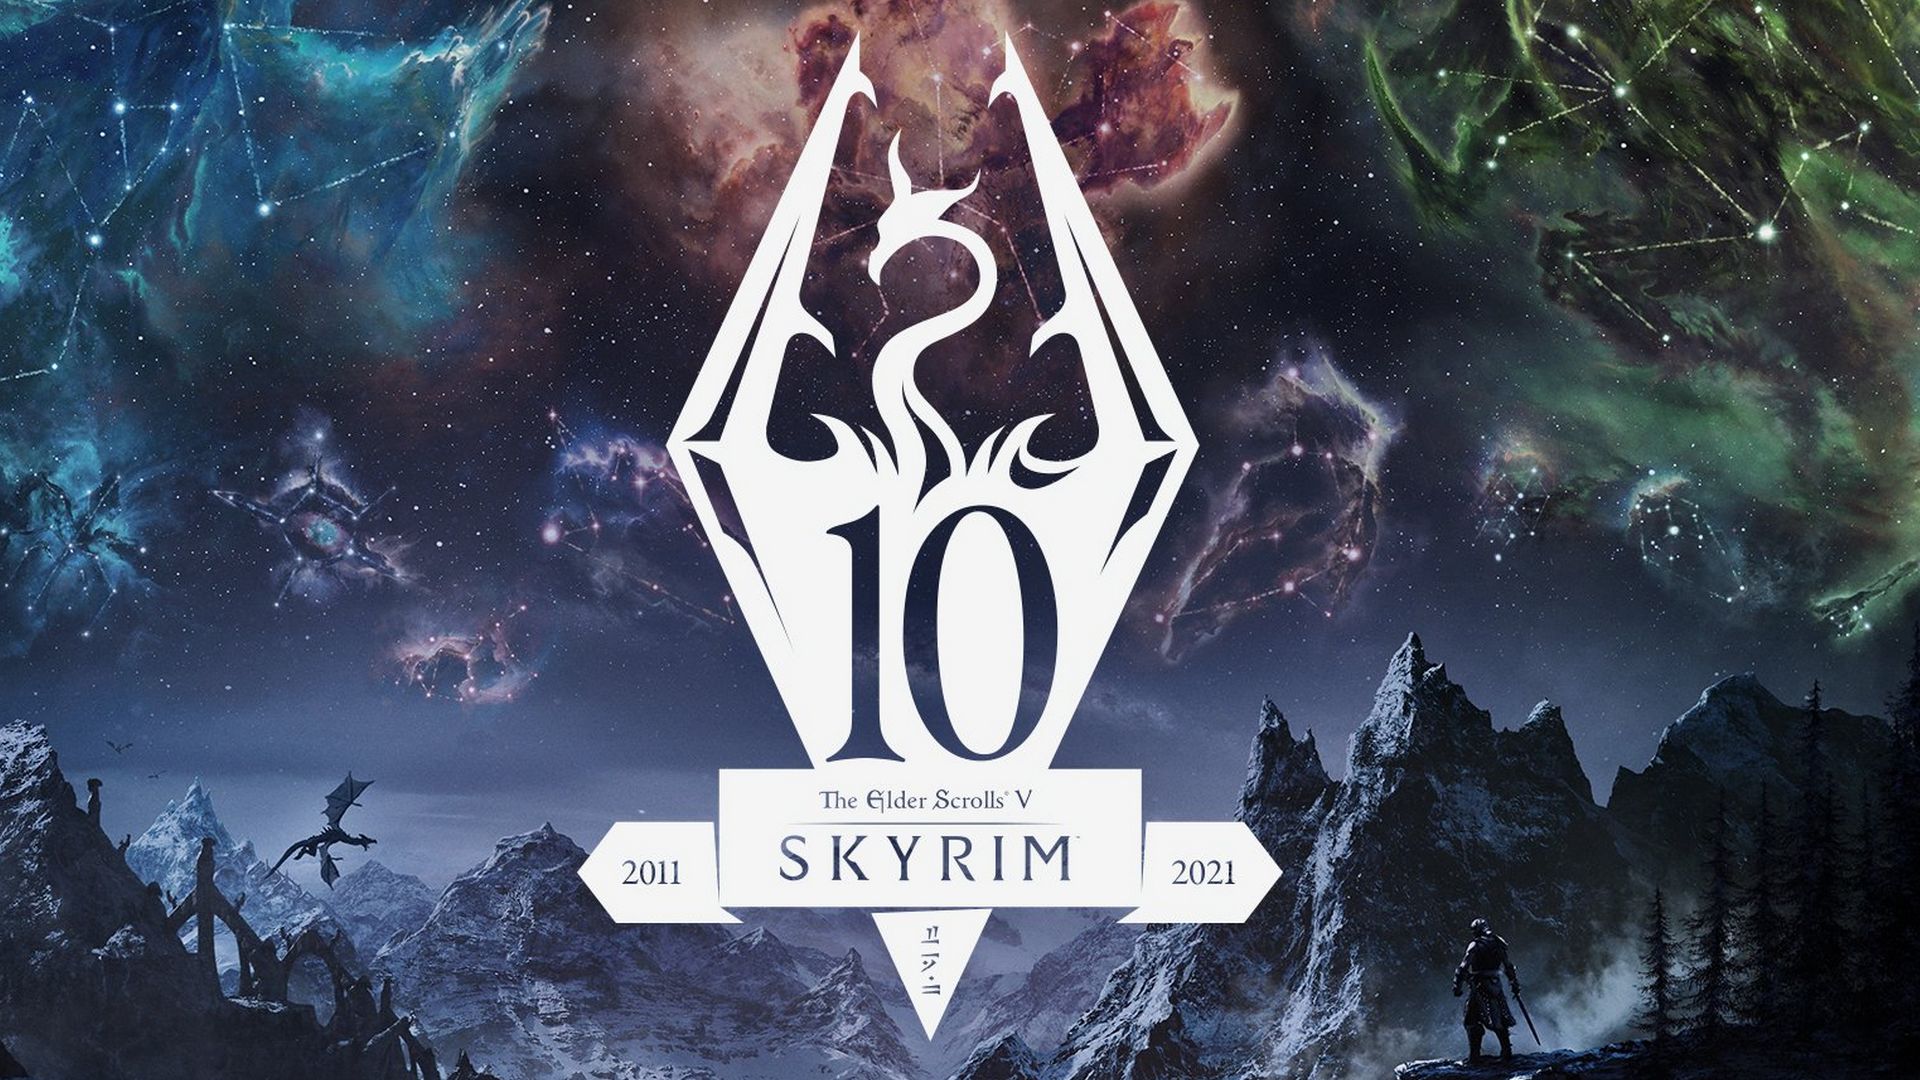 Skyrim Anniversary Edition Reveals Huge 10 Years of Free Content!  |  Xbox One